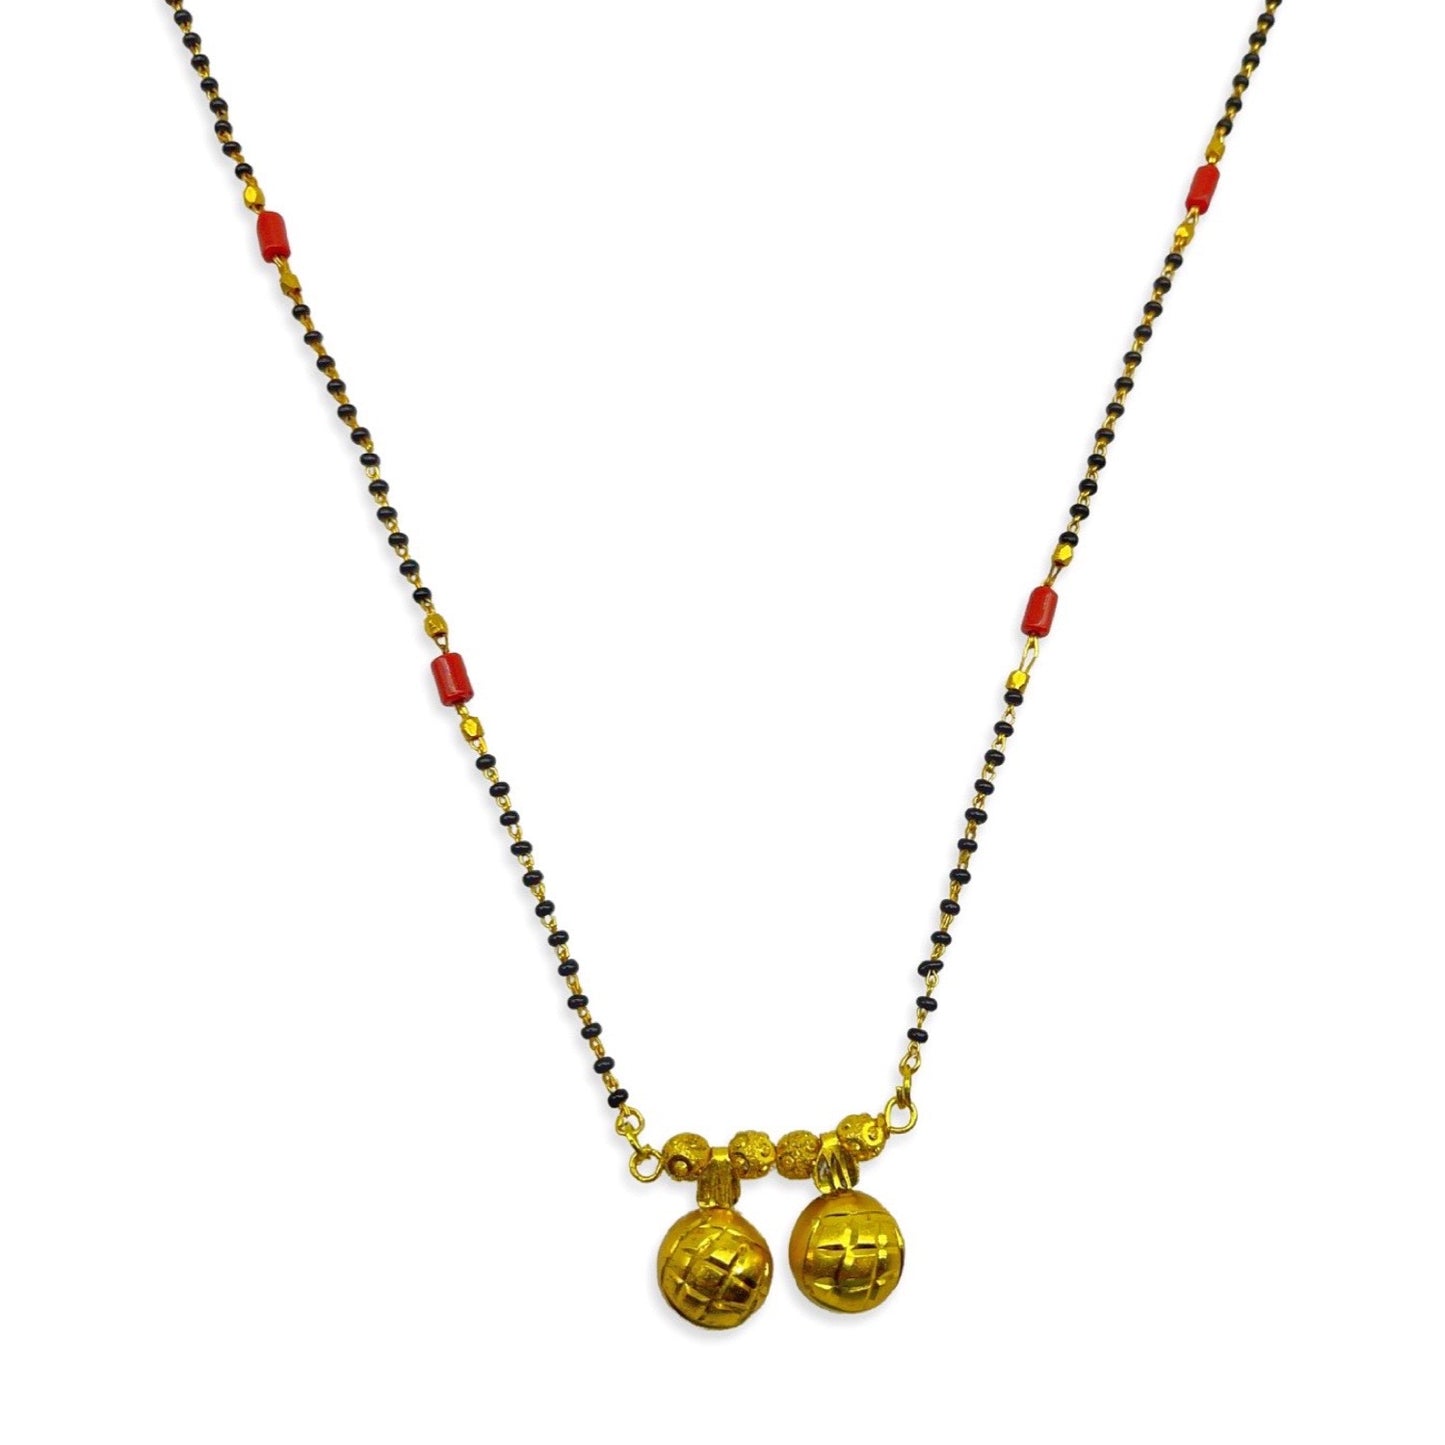 Marathi Style Long Vati Mangalsutra Designs Gold Plated Simple Red And Black Beads Chain